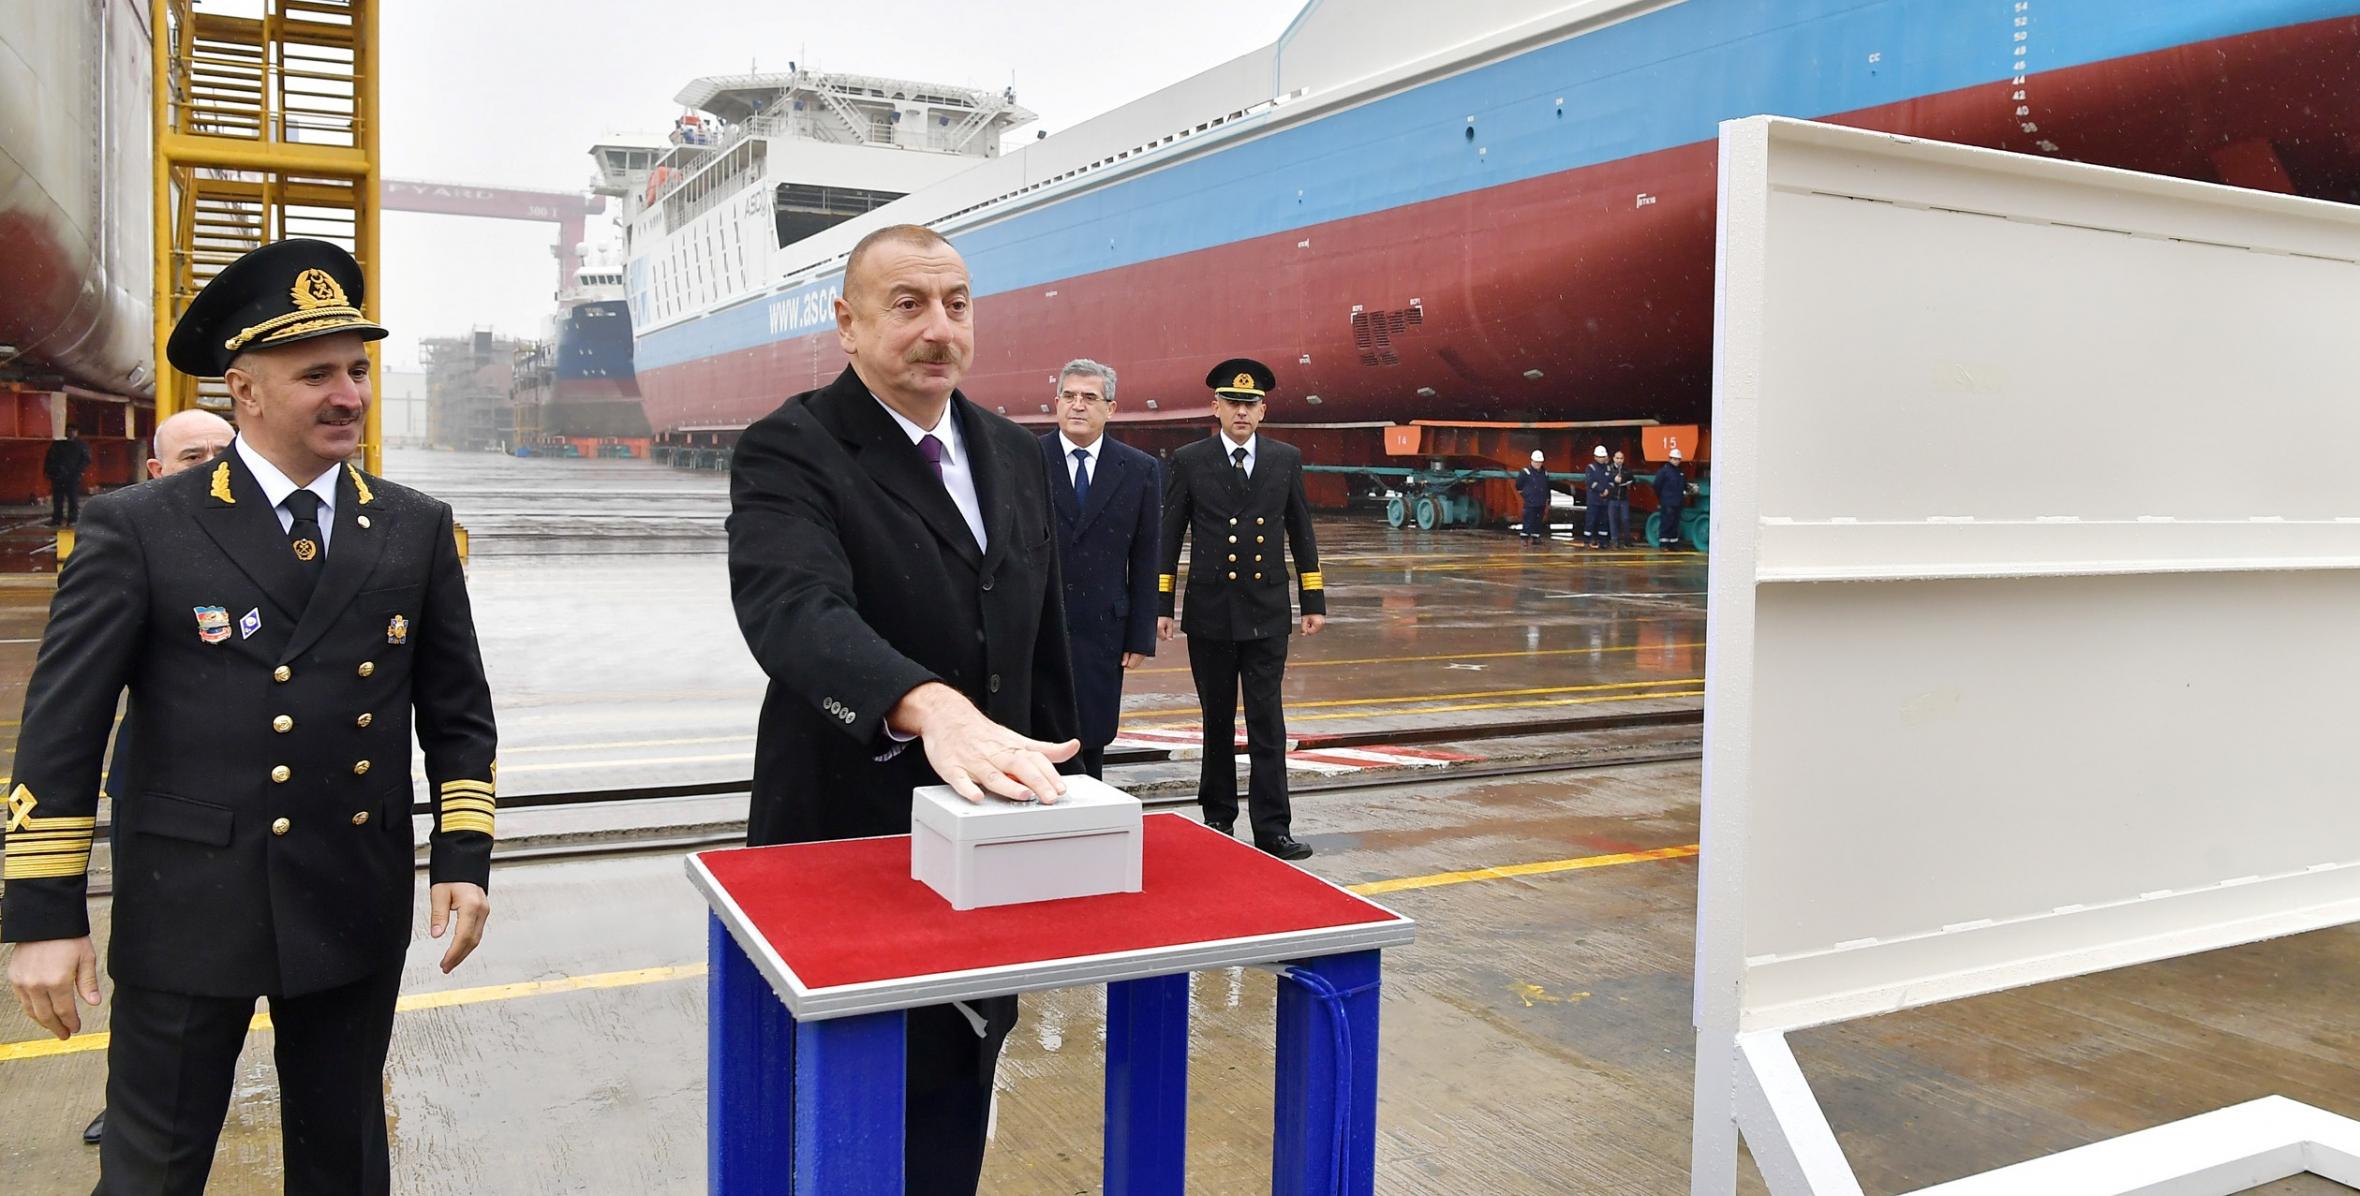 Ilham Aliyev attended ceremony to launch first tanker built at Baku Shipyard